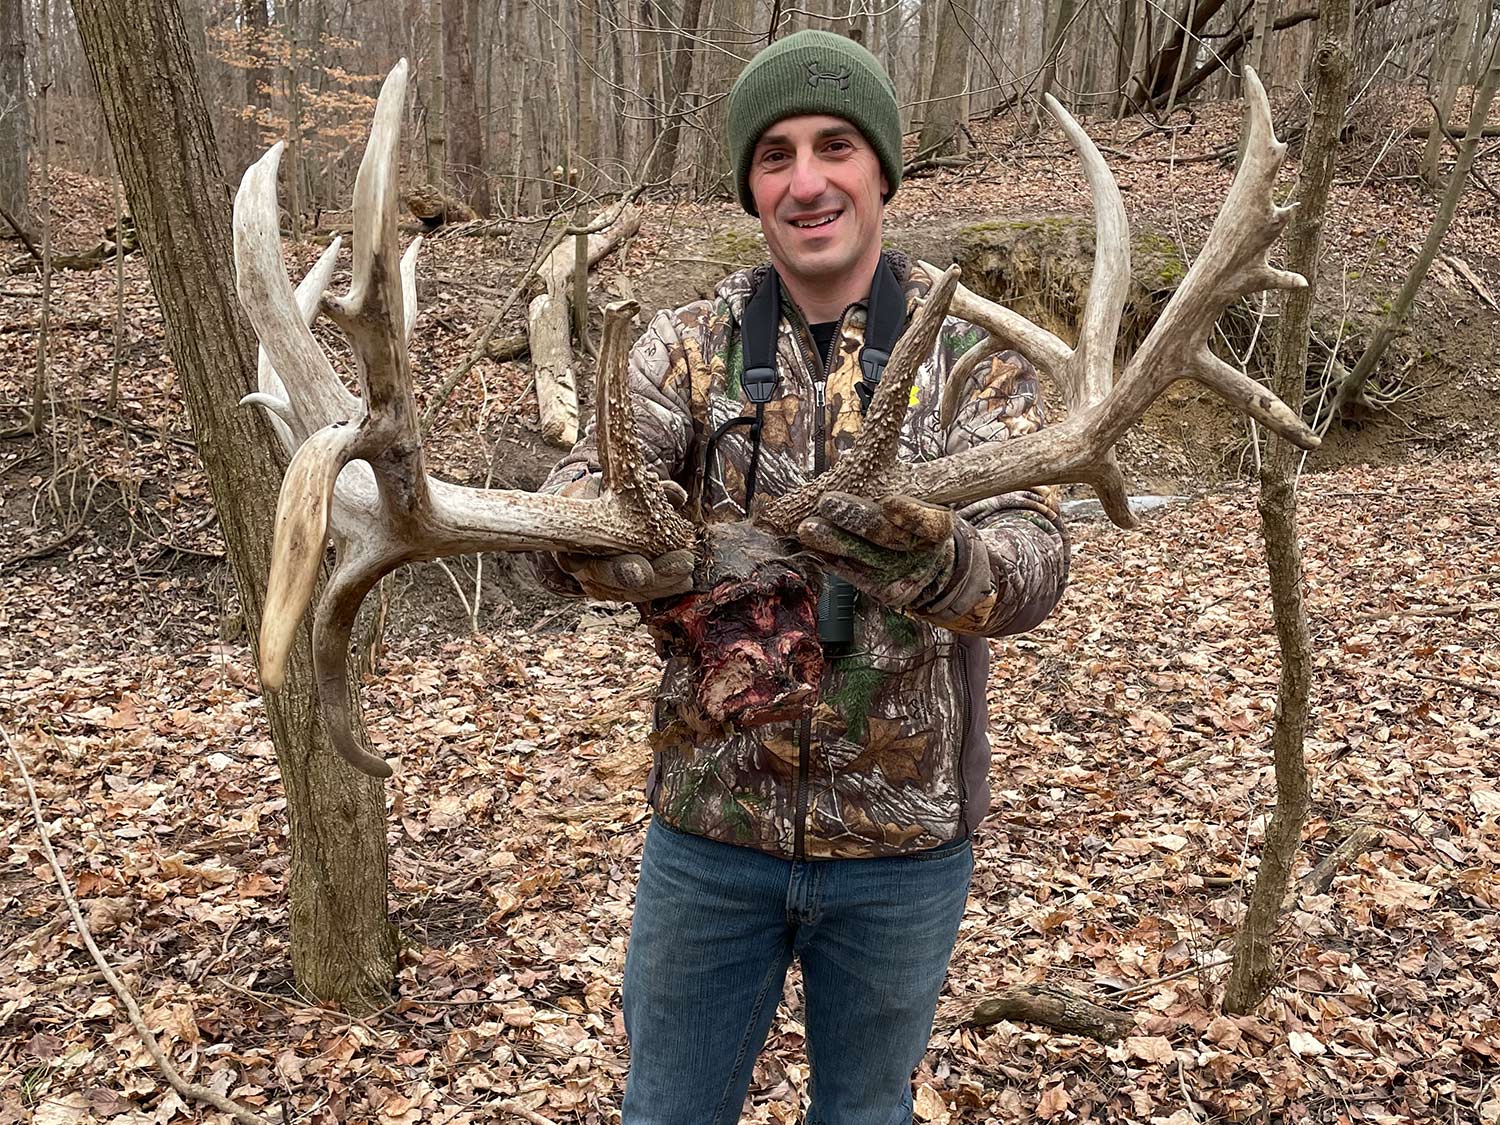 A hunter holds up a shed deer antlers.